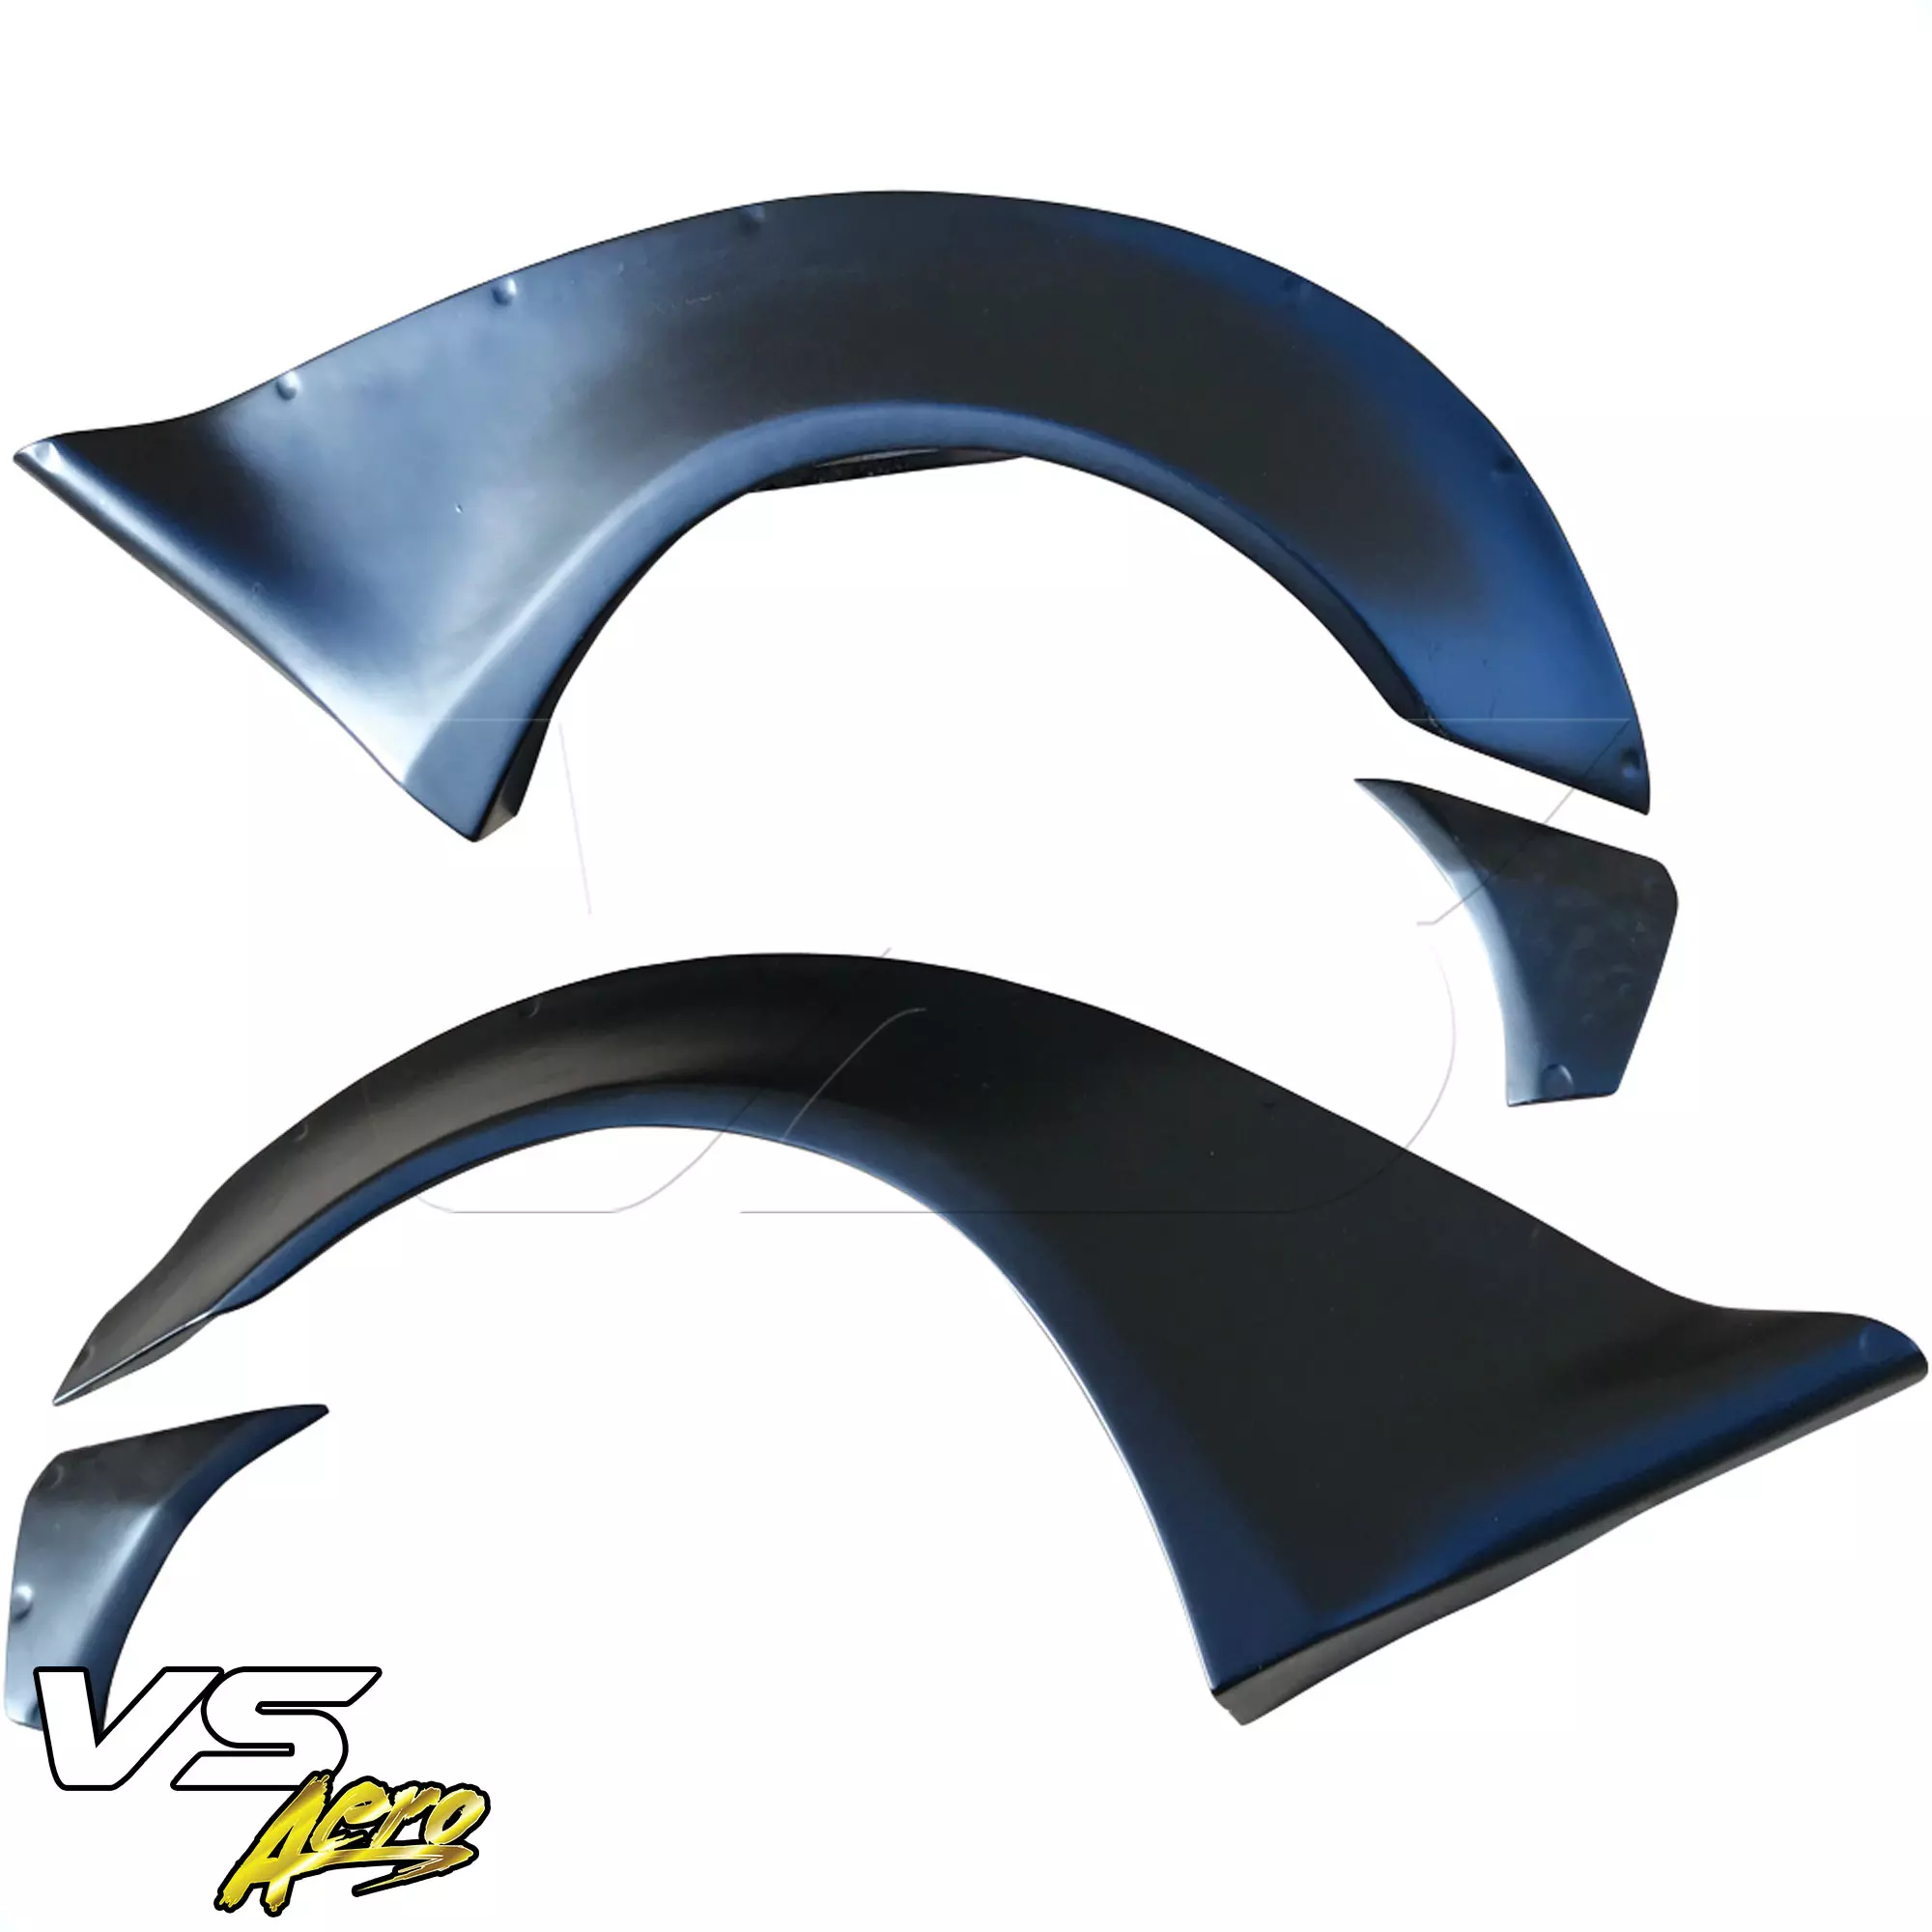 VSaero FRP LBPE Wide Body Fender Flares (rear) 4pc > Infiniti G37 Coupe 2008-2015 > 2dr Coupe - Image 17